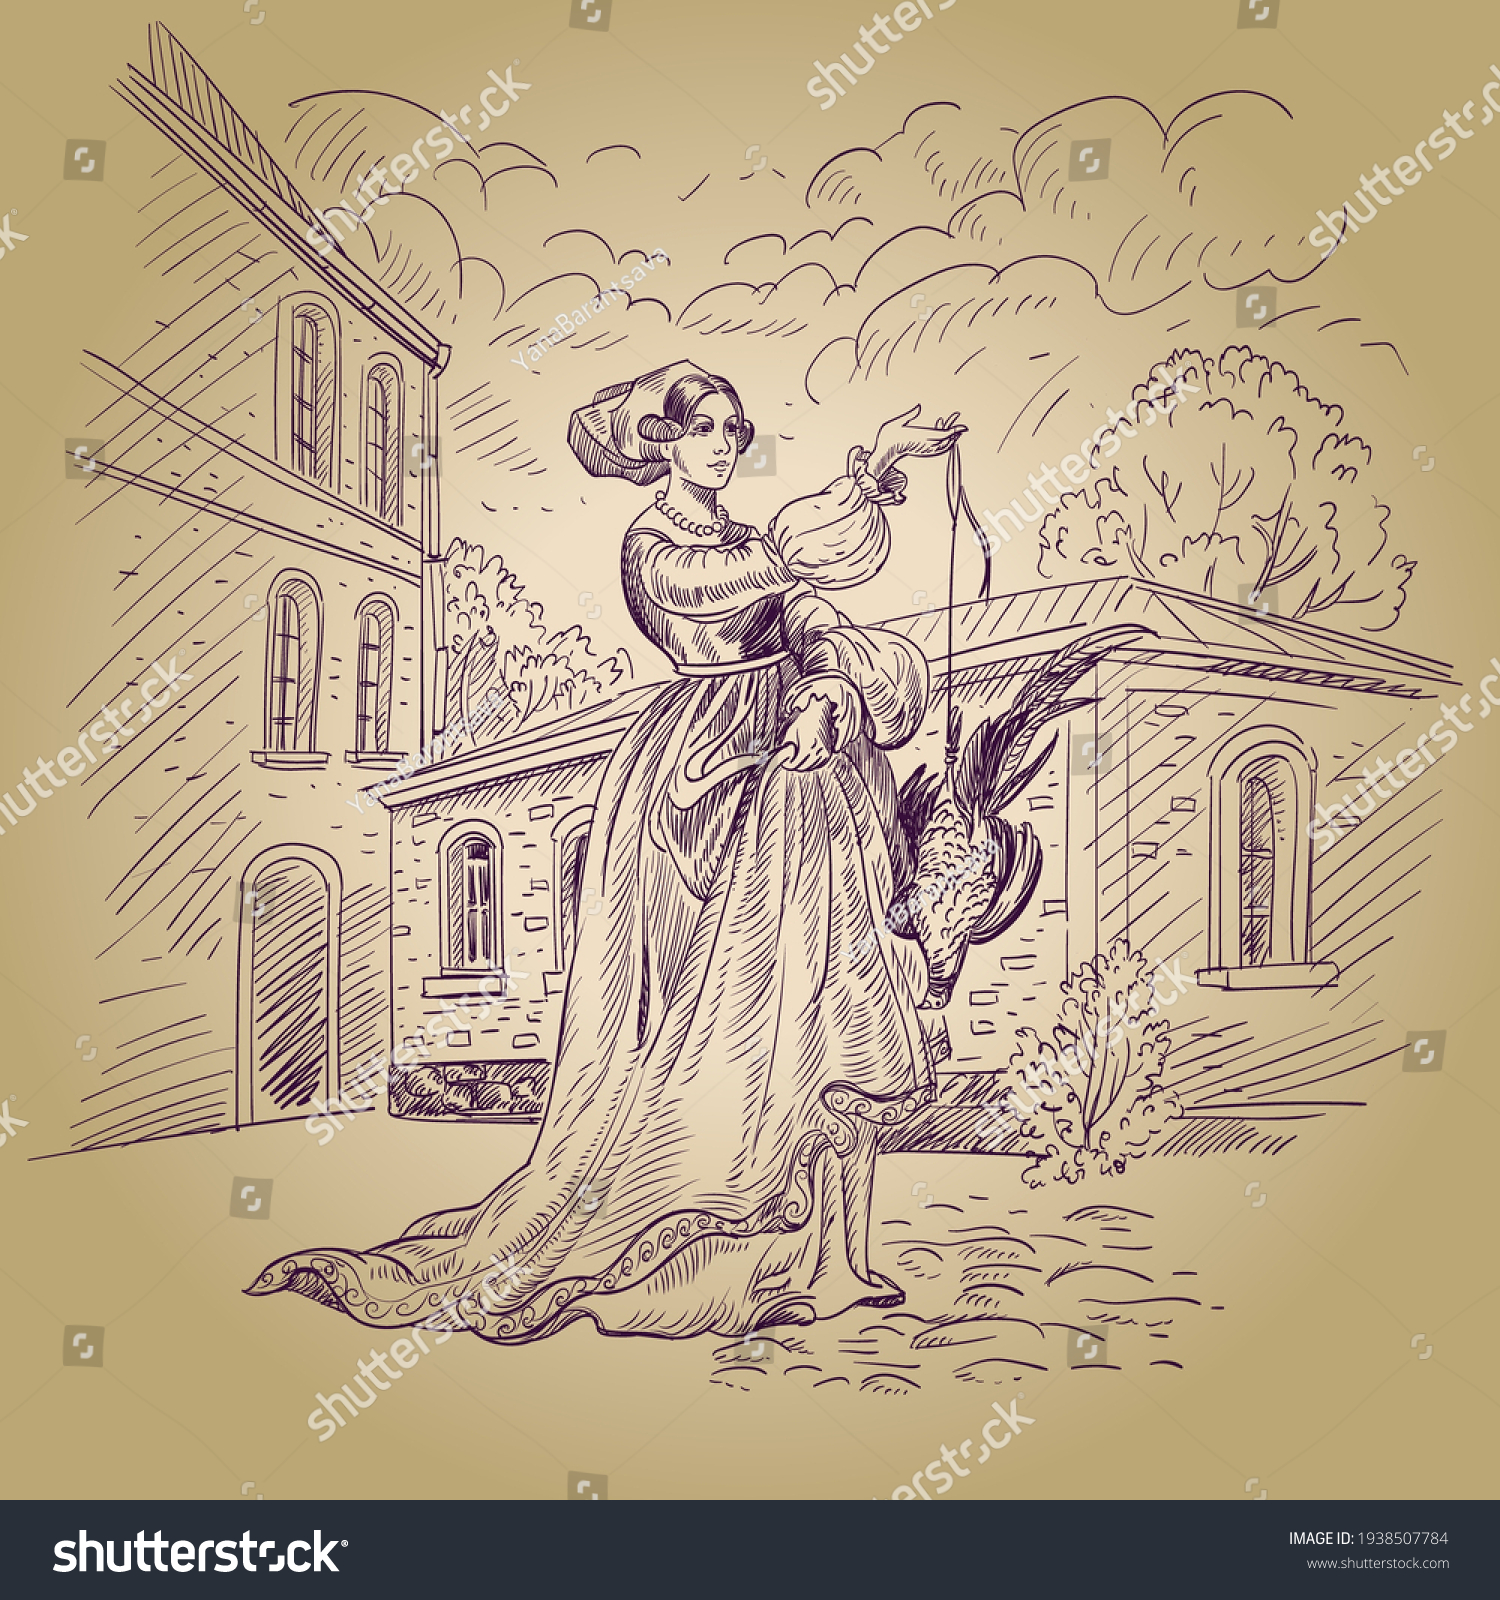 SVG of The engraving depicts a servant girl carrying a grouse bird. She is in an urban environment in traditional 18th-century clothing. Europe 18th century svg